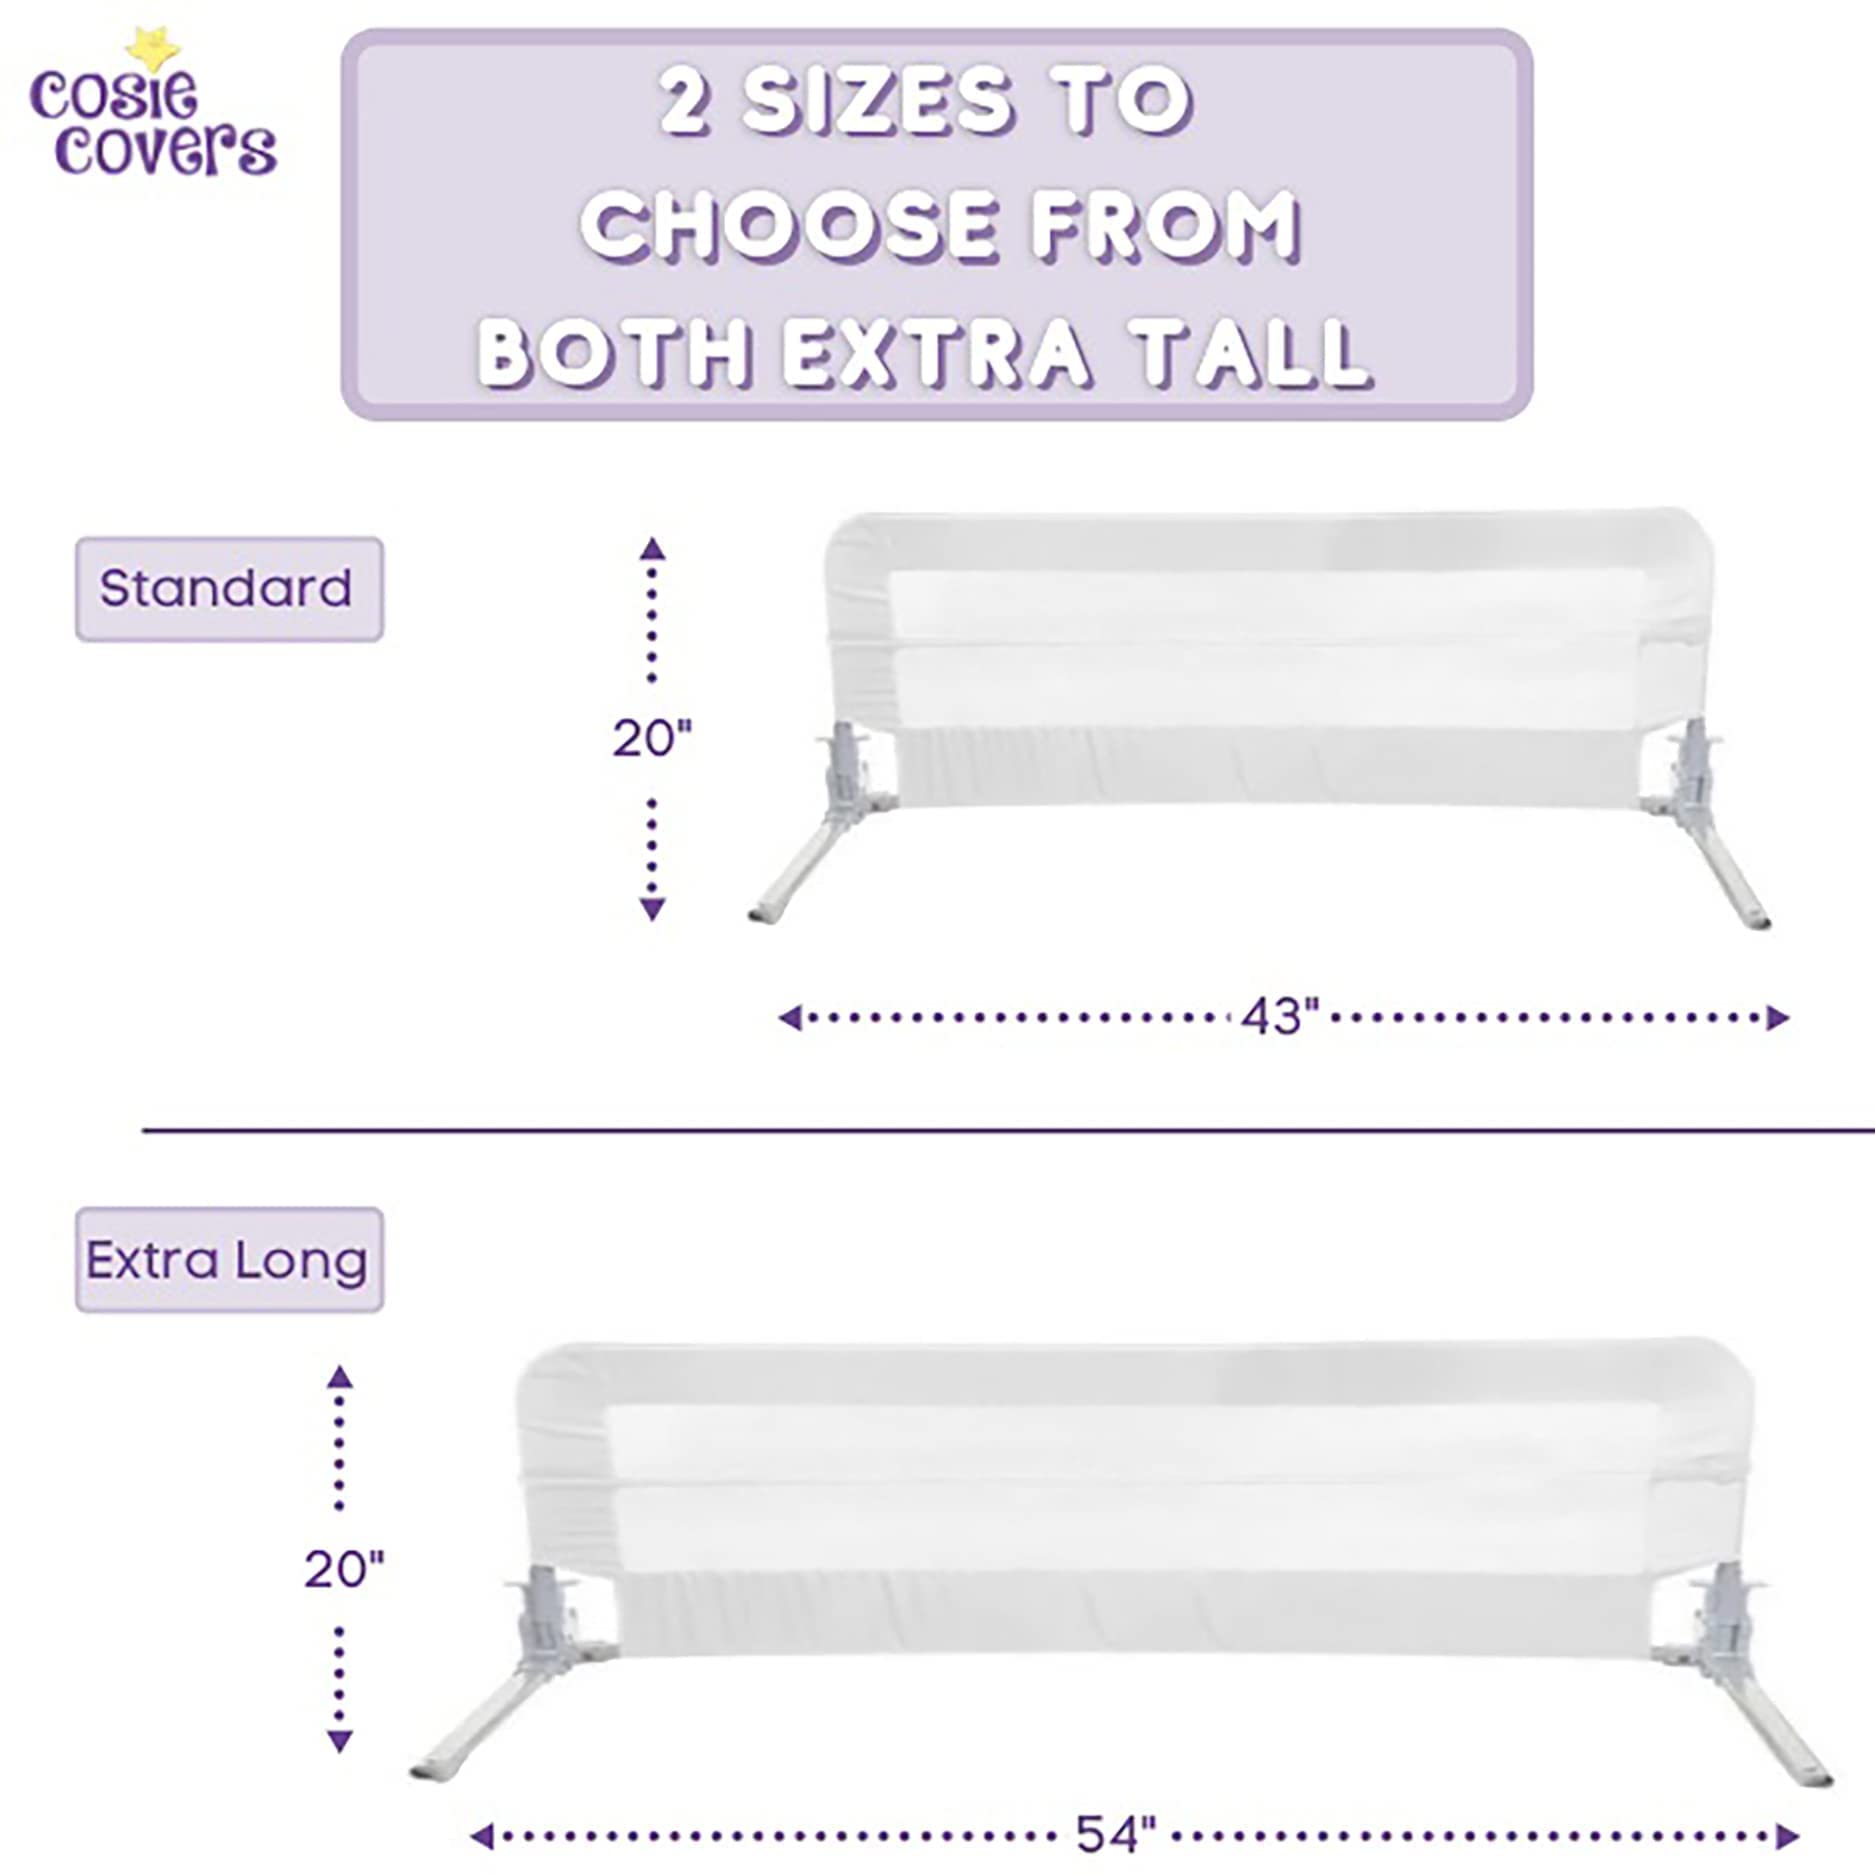 Cosie Covers Bed Rail for Toddlers, Toddler Bed Rail Guard for Baby Kids, Extra Tall, Fits Twin, Full, Queen and King Foldable Side Rail - Standard 43" Grey